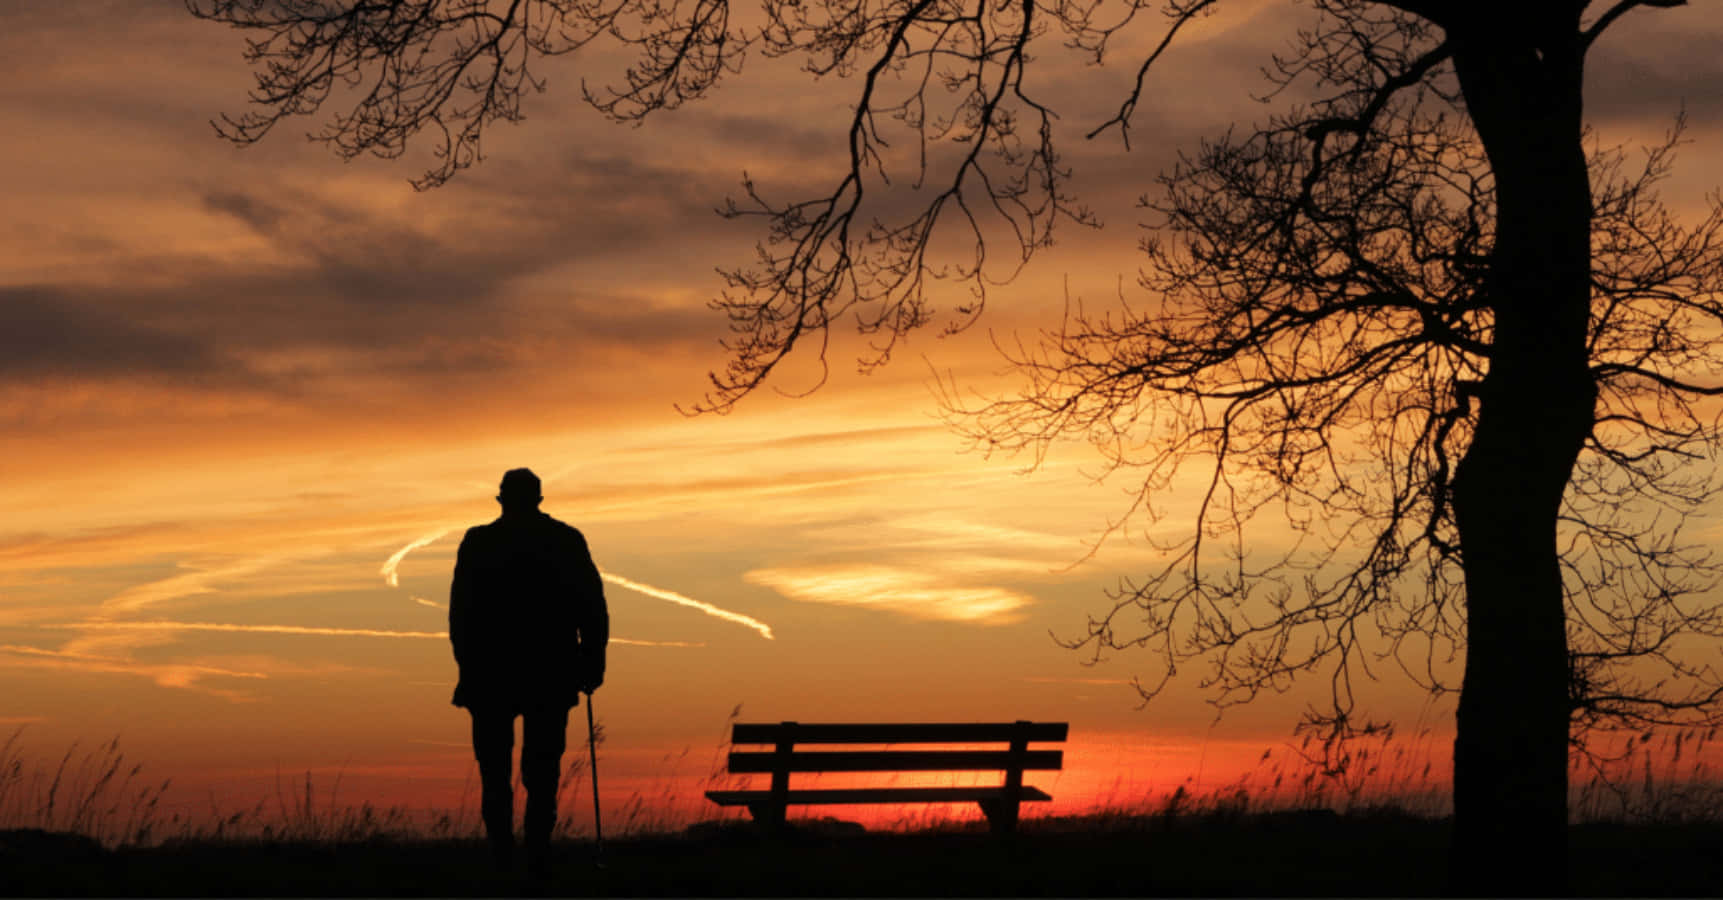 Alone Sad Old Man Silhouette Sunset Picture